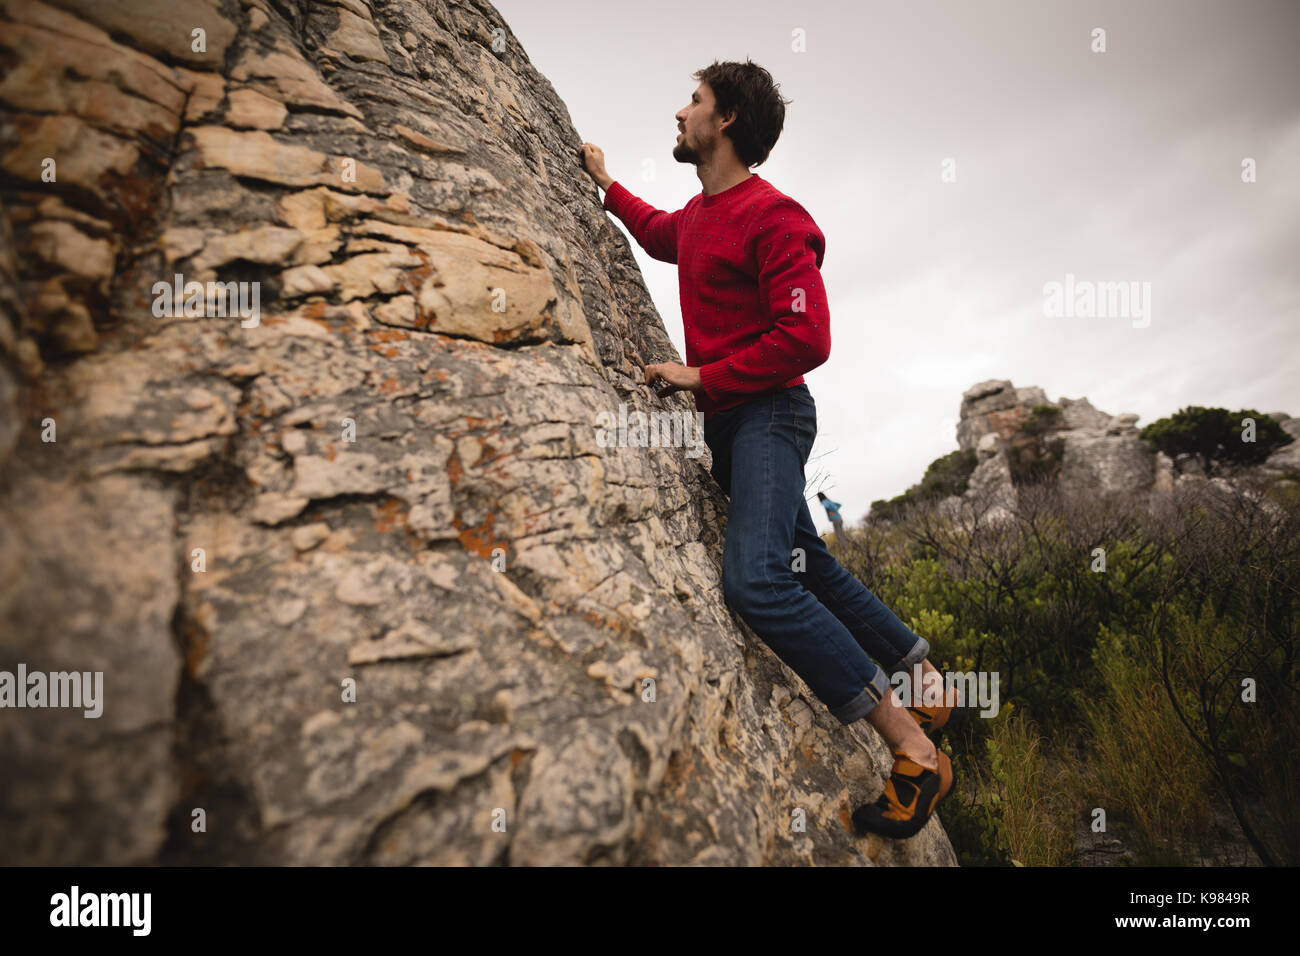 Determined man climbing cliff on a sunny day Stock Photo